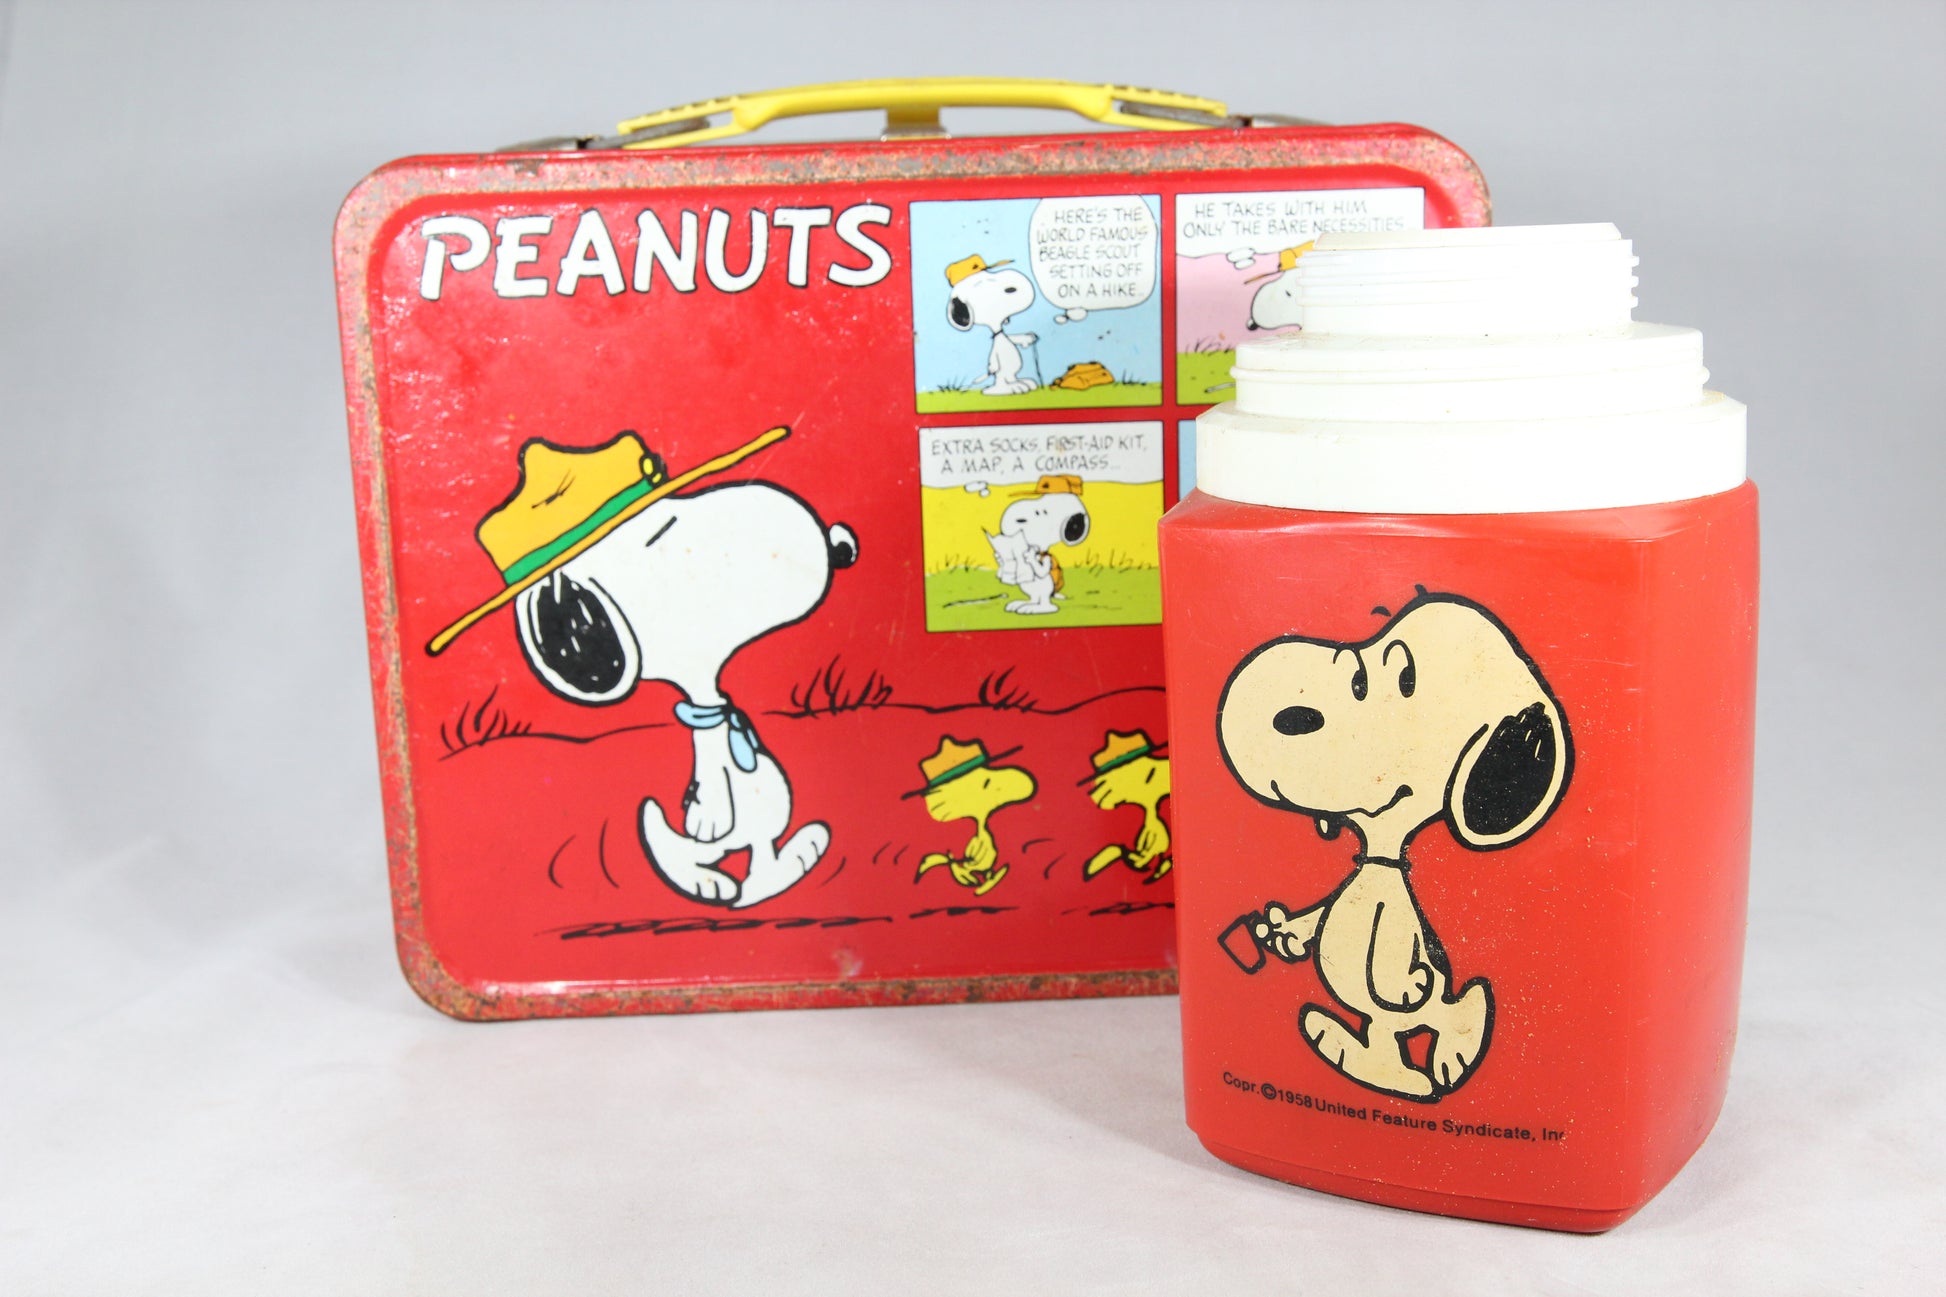 Vintage 1968 Go To School Have Lunch with Snoopy Peanuts Lunch Box with  Thermos